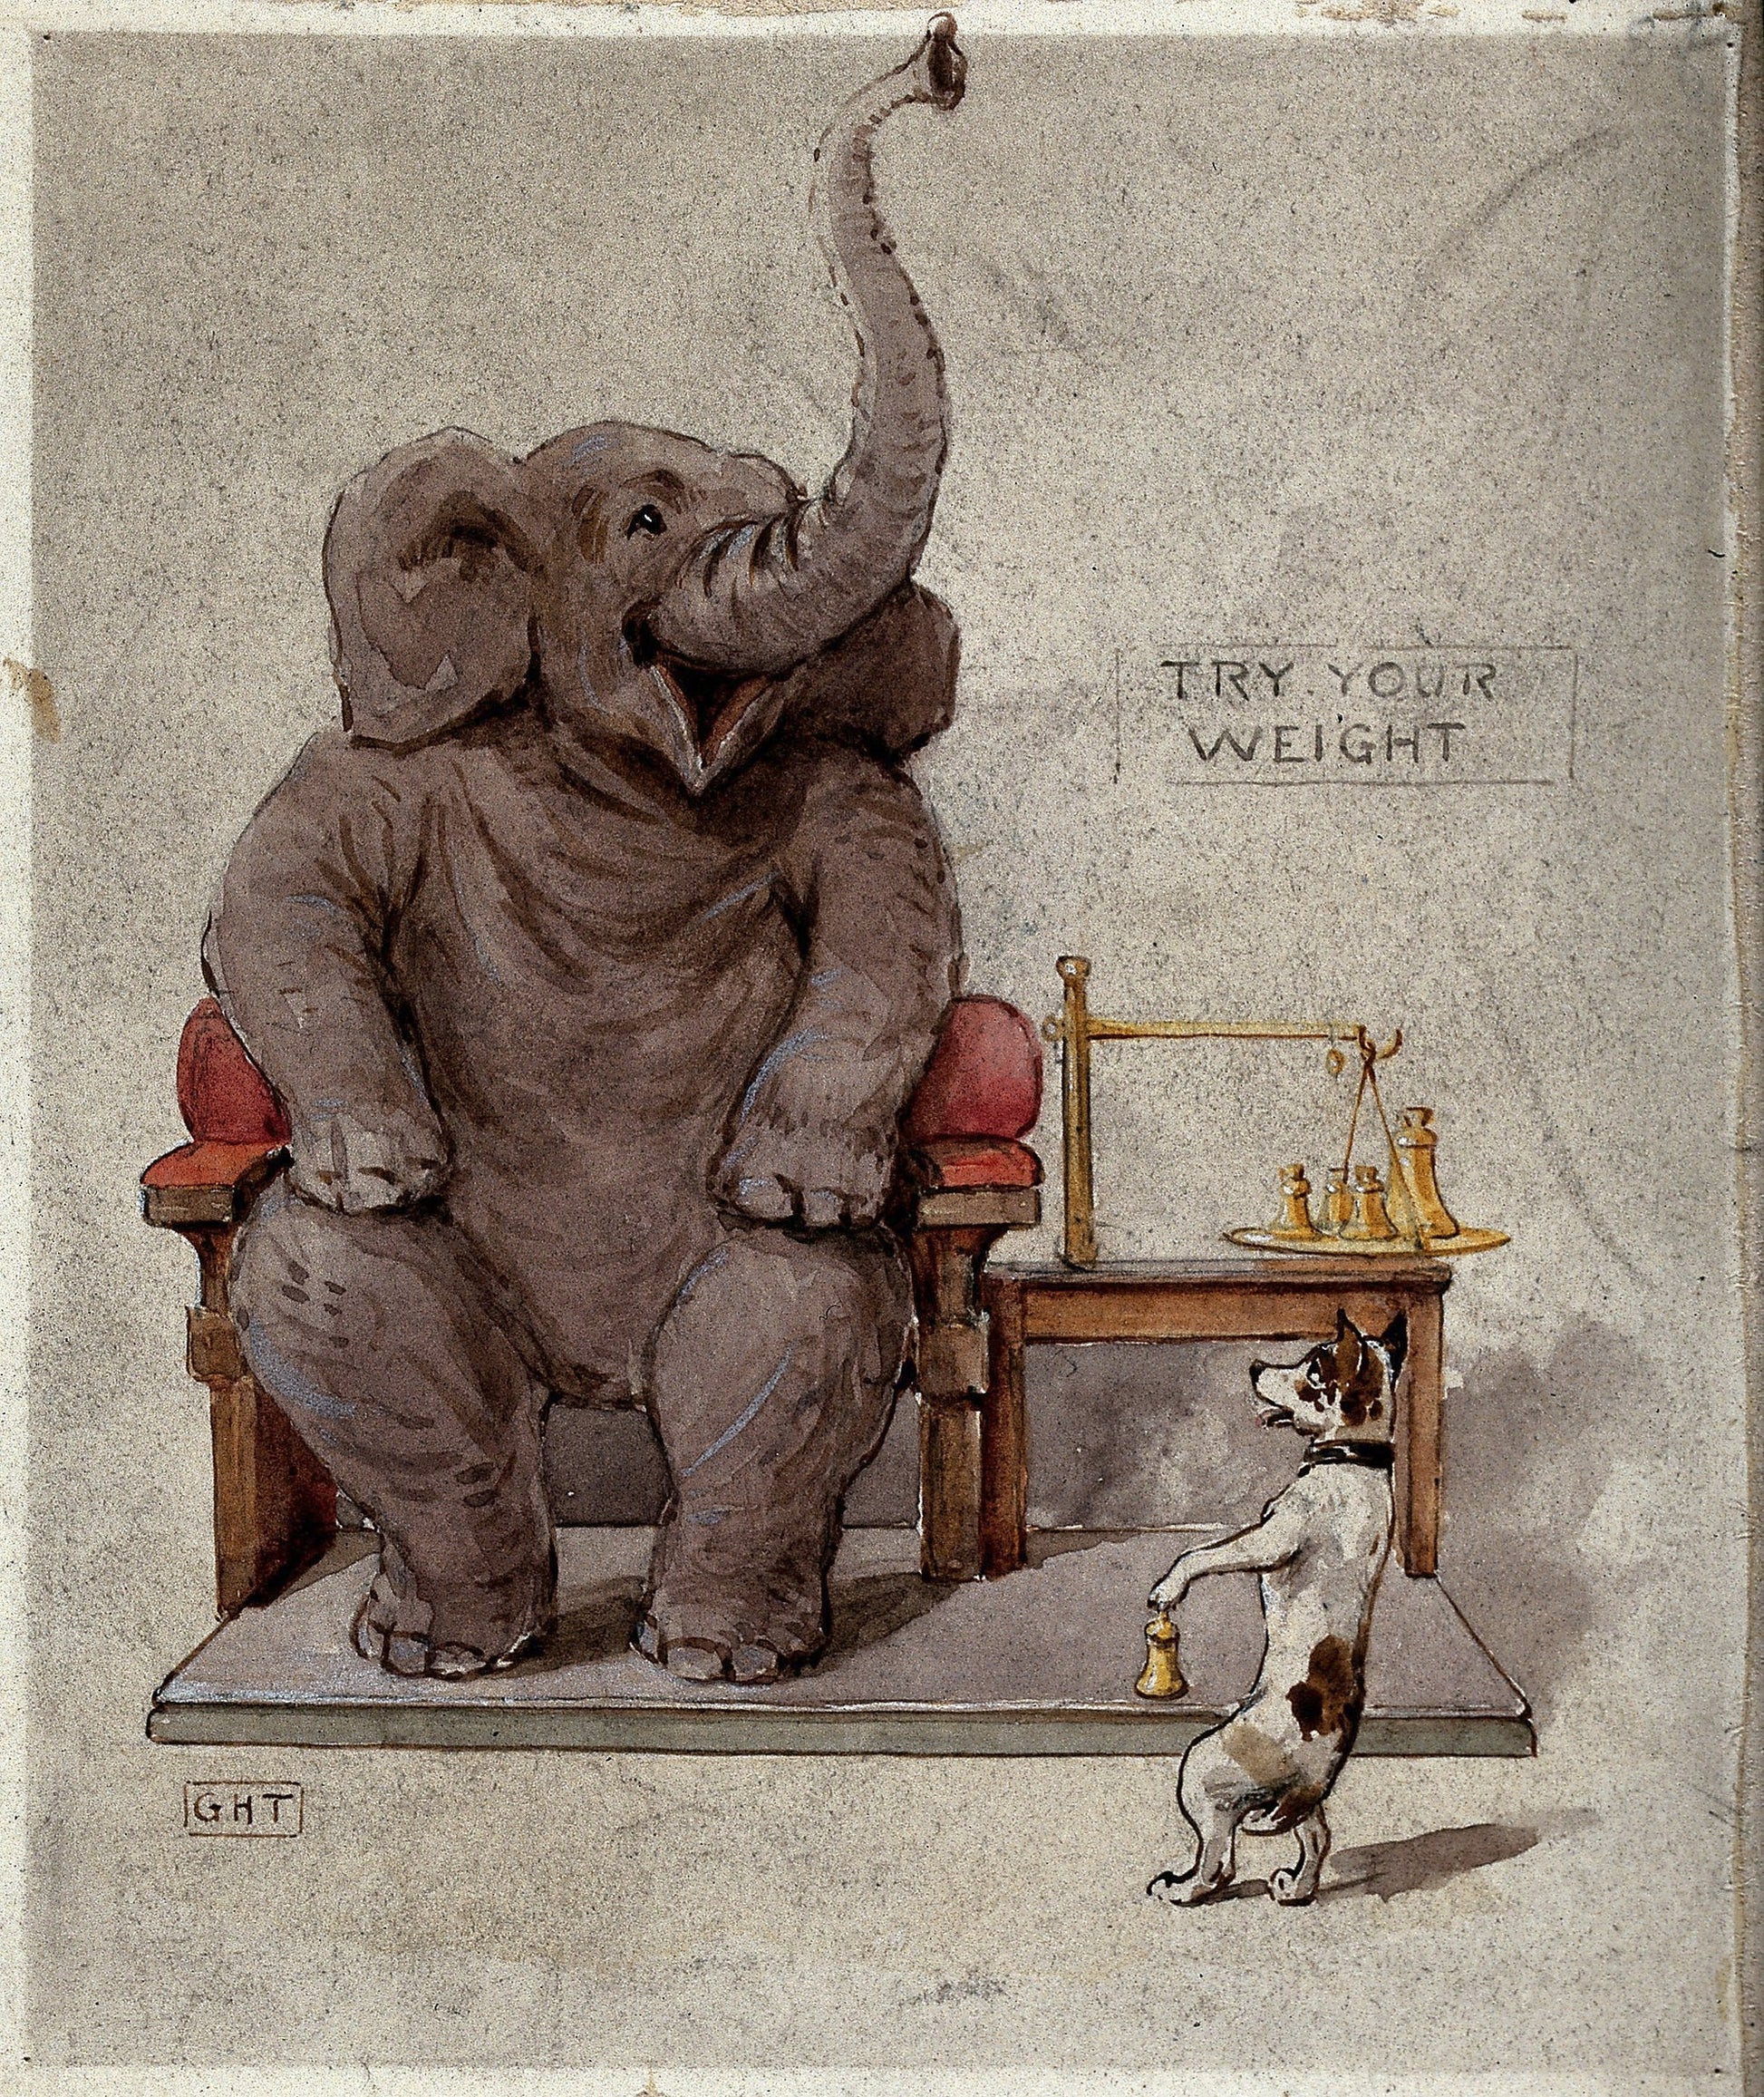 Elephant being weighed by a dog (1900s) | Vintage elephant print | George Hope Tait Posters, Prints, & Visual Artwork The Trumpet Shop   